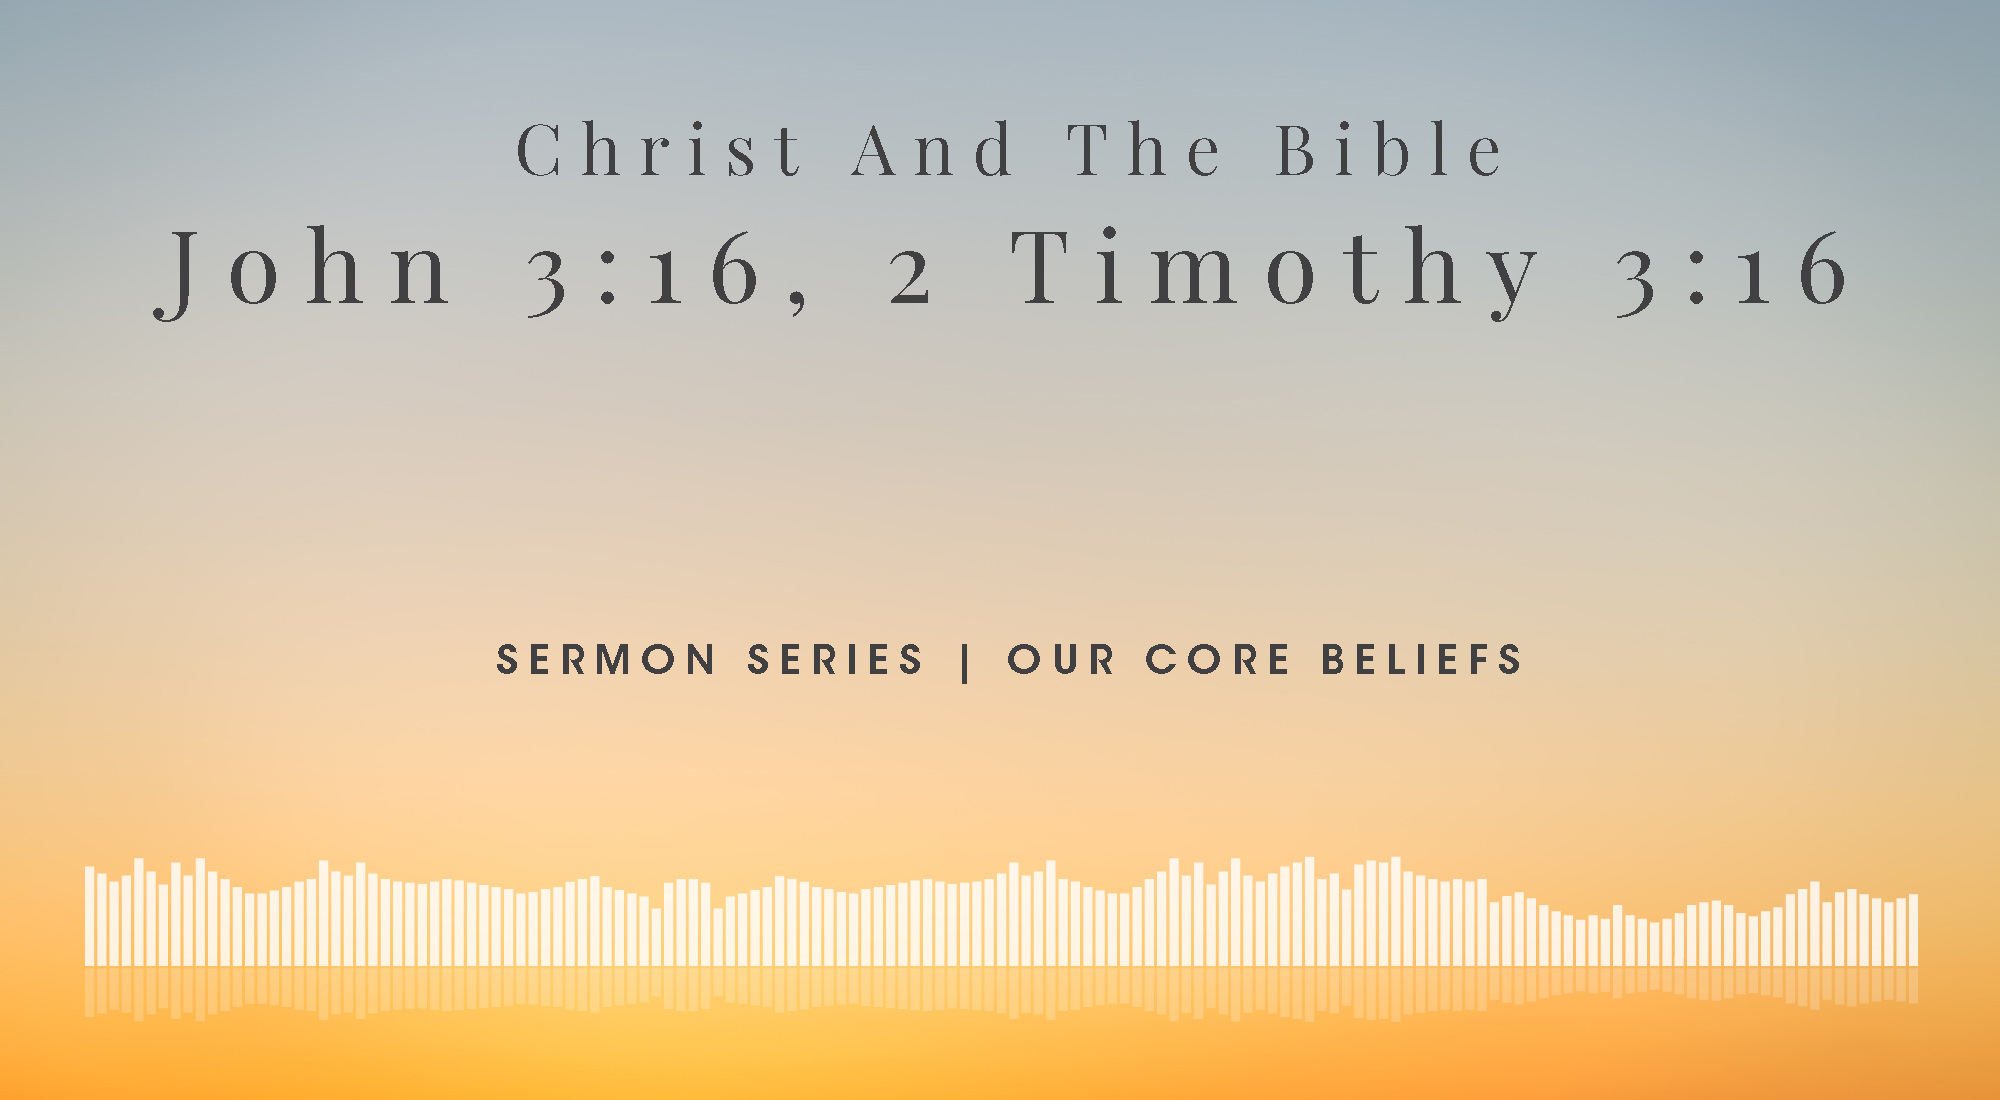 Our Core Beliefs at Wyandotte County Christian Church In Kansas City, KS - Christ and the Bible - John 3:16 2 Timothy 3:16